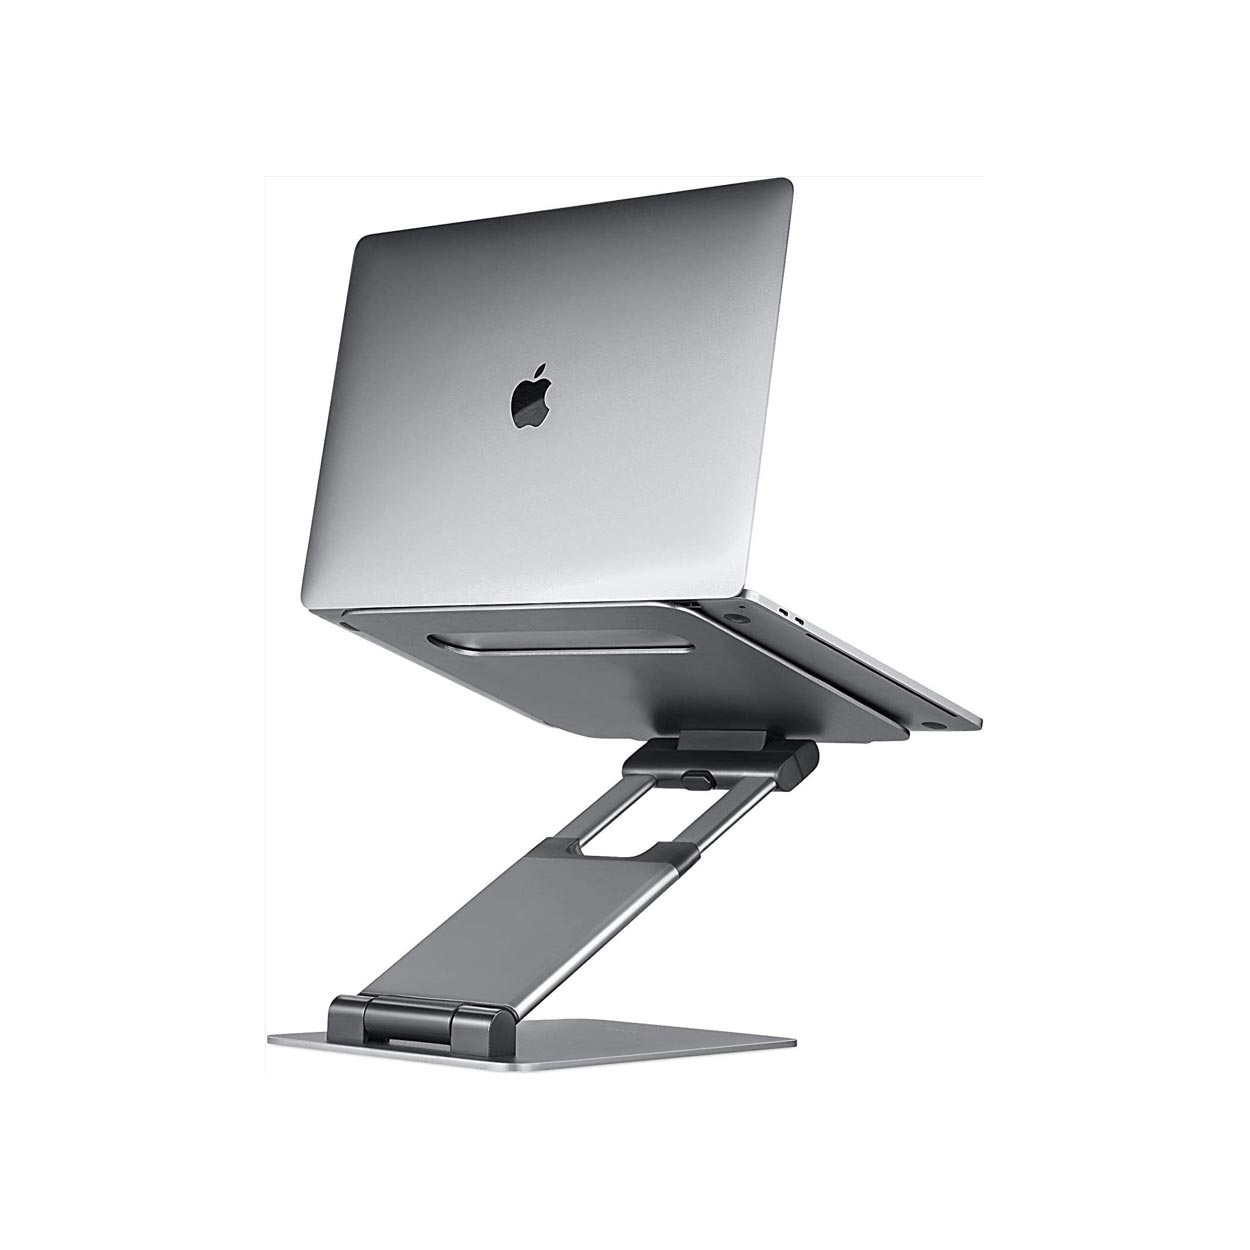 Ergonomic Laptop Stand with Adjustable Height - 3